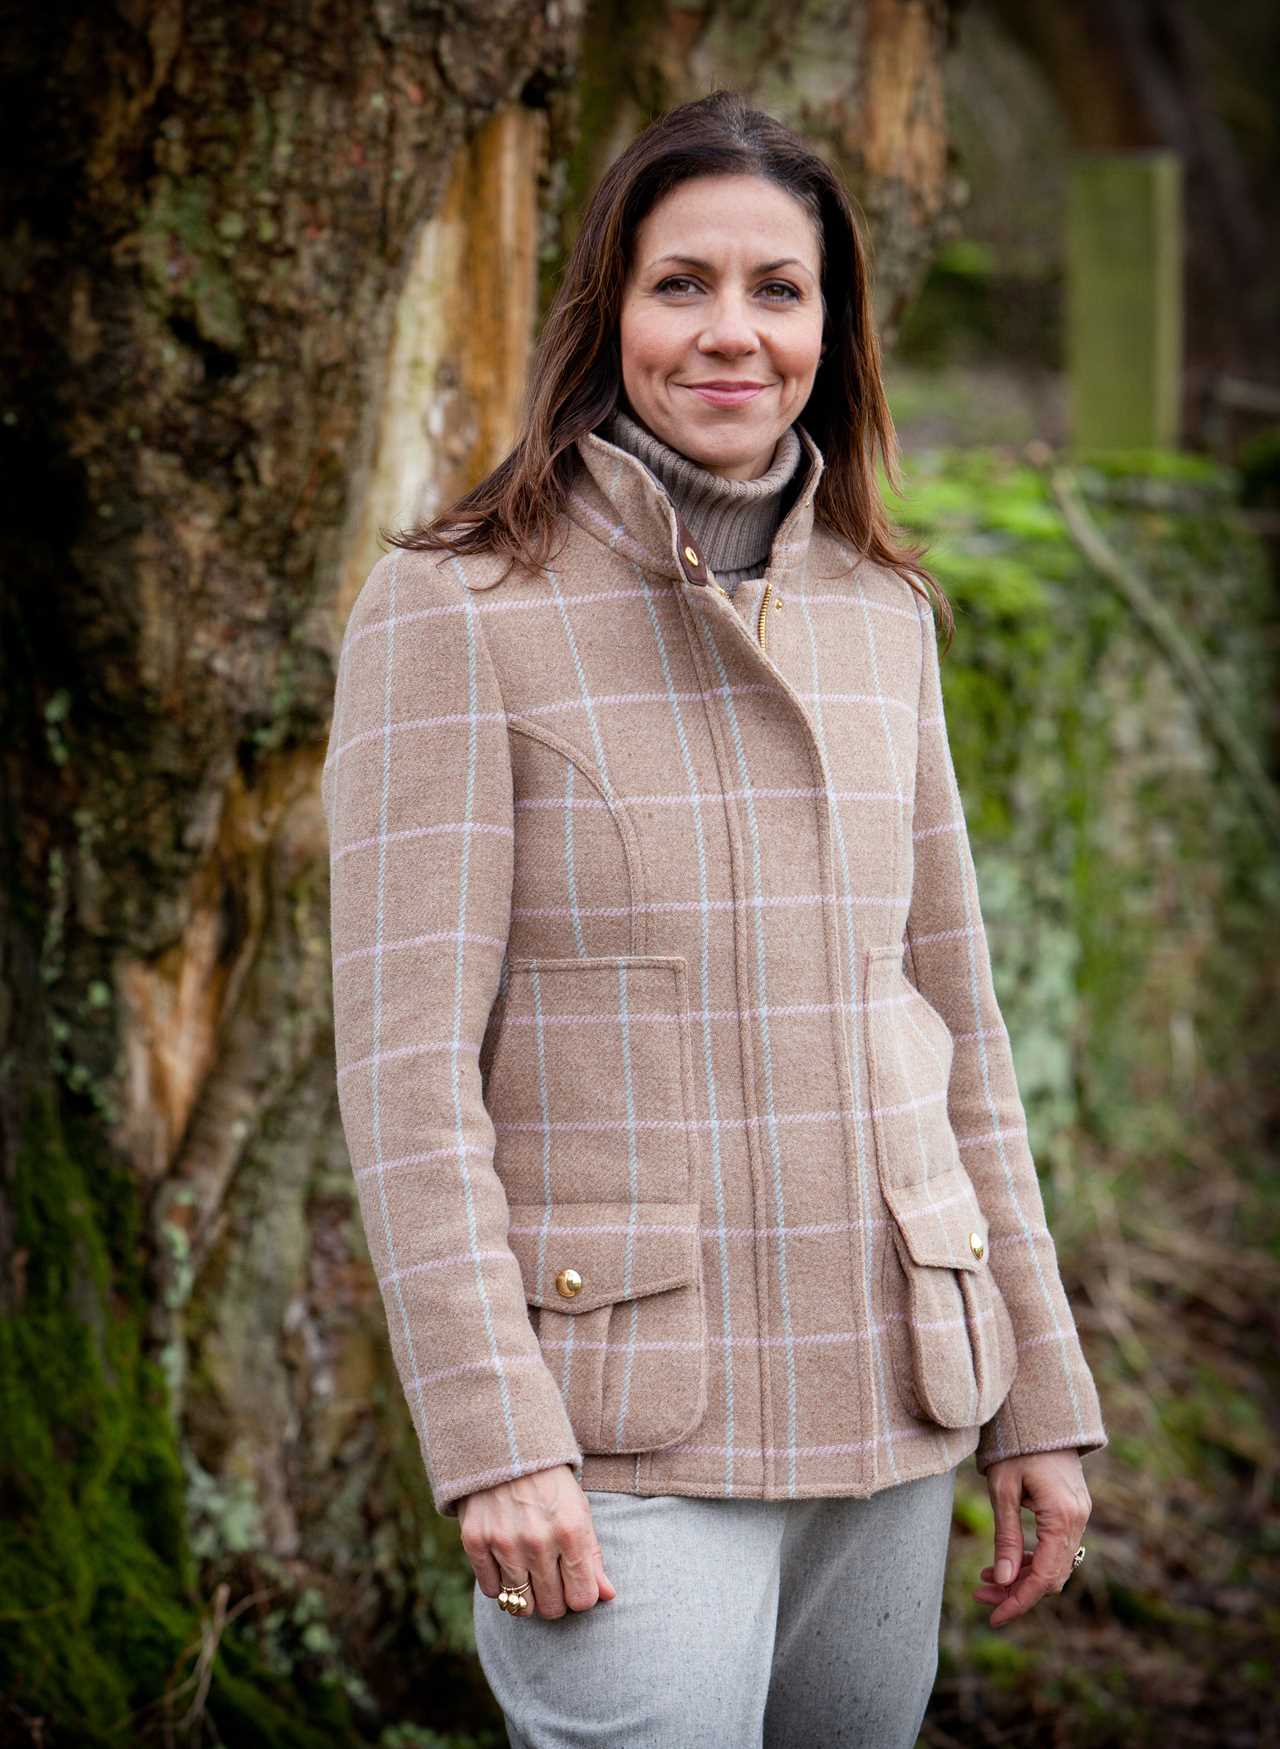 Countryfile’s Julia Bradbury poses in a crop top and